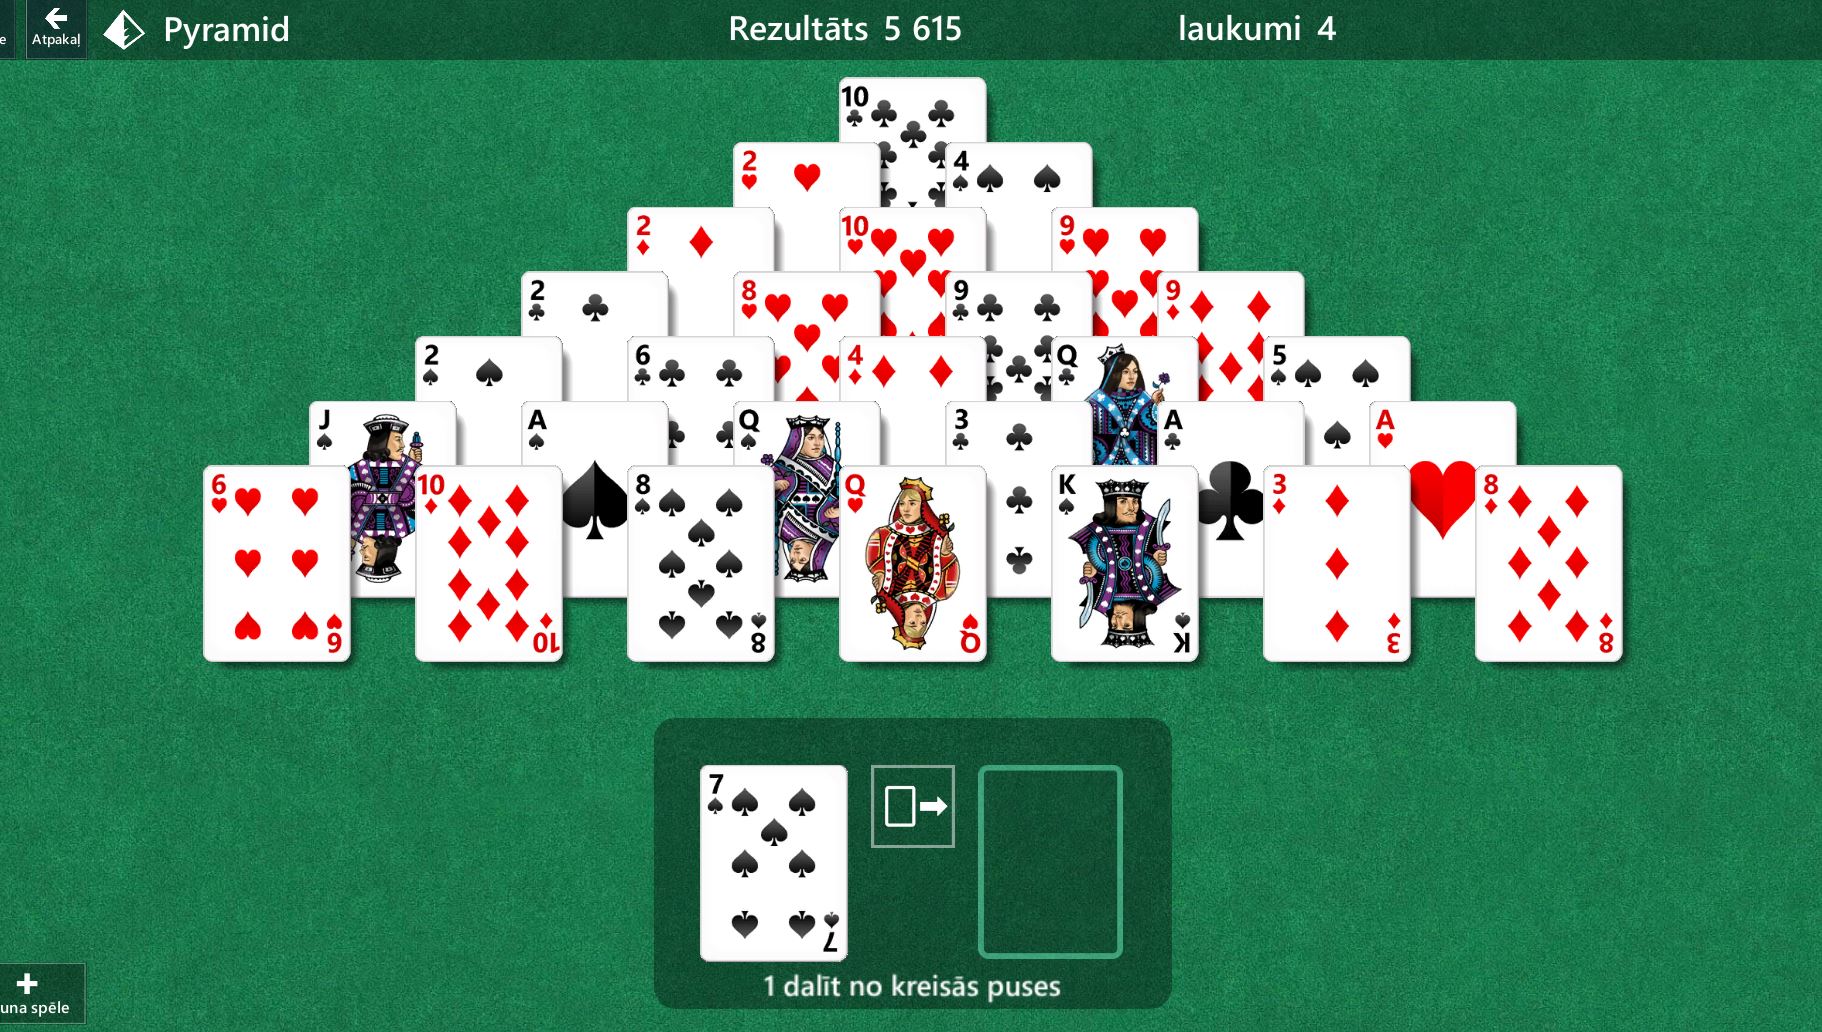 Daily Challenges of Microsoft Solitaire Collections - Complete